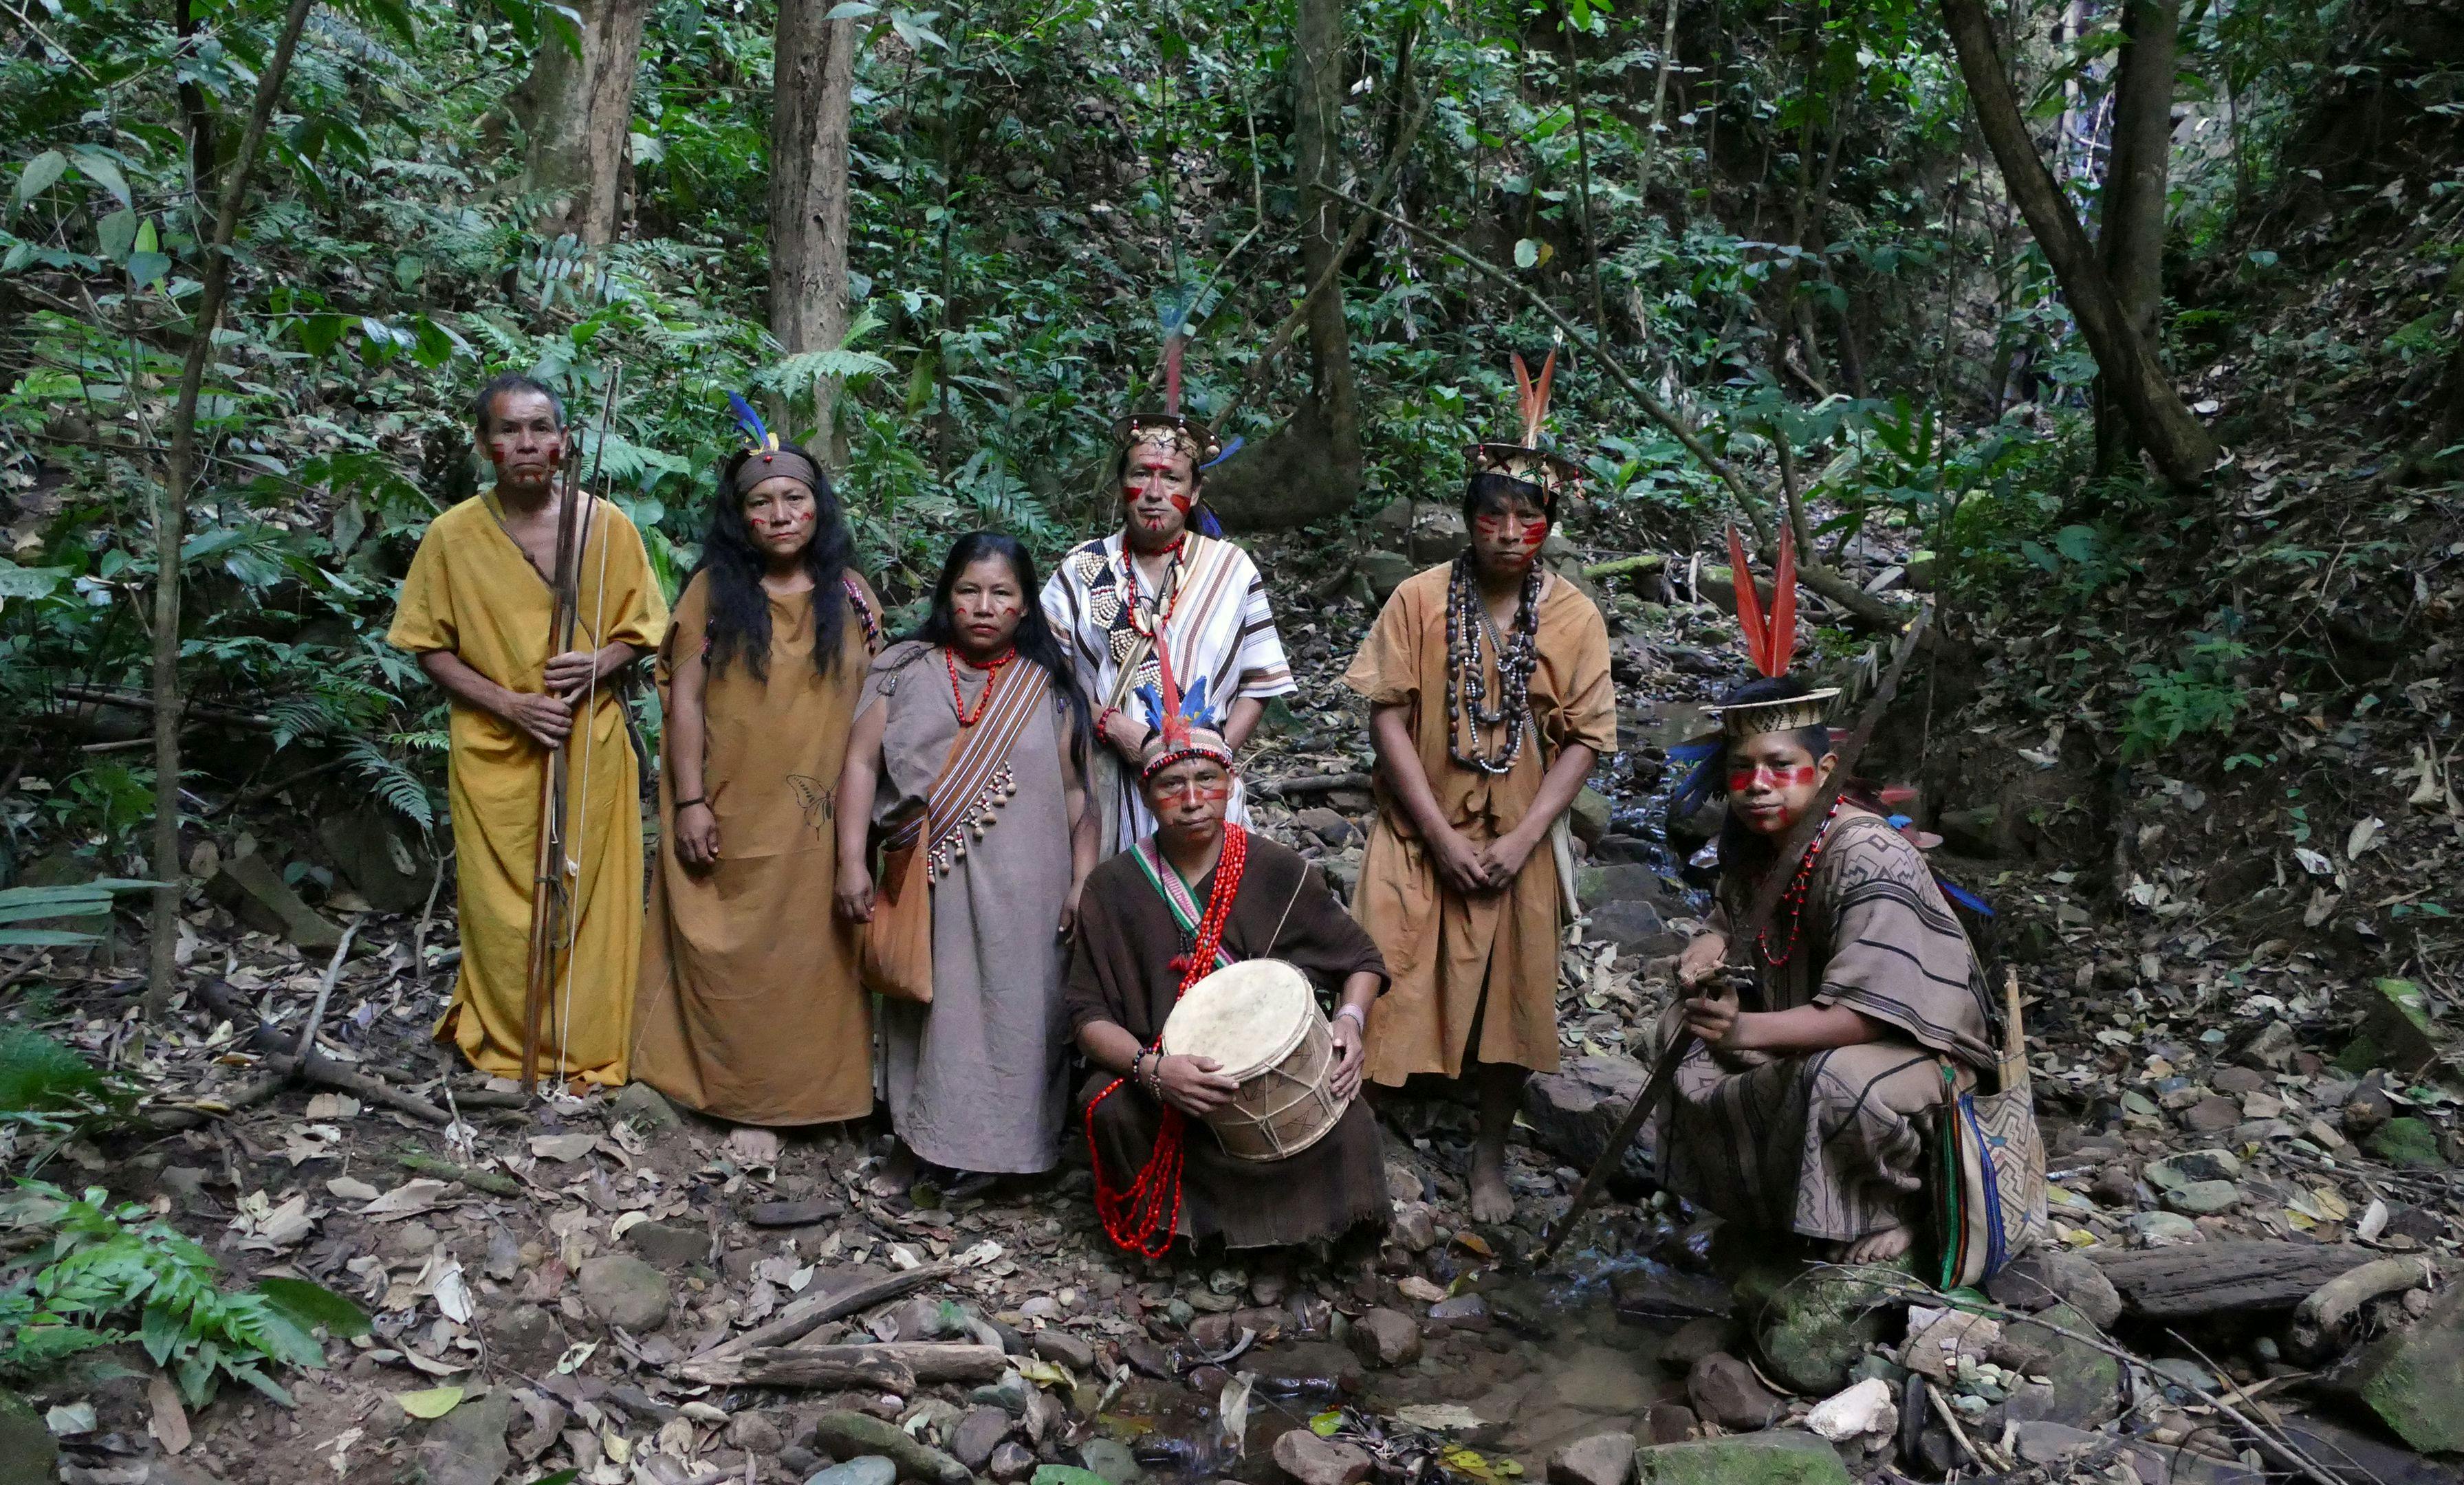 expedition-into-maniri-forest.jpg